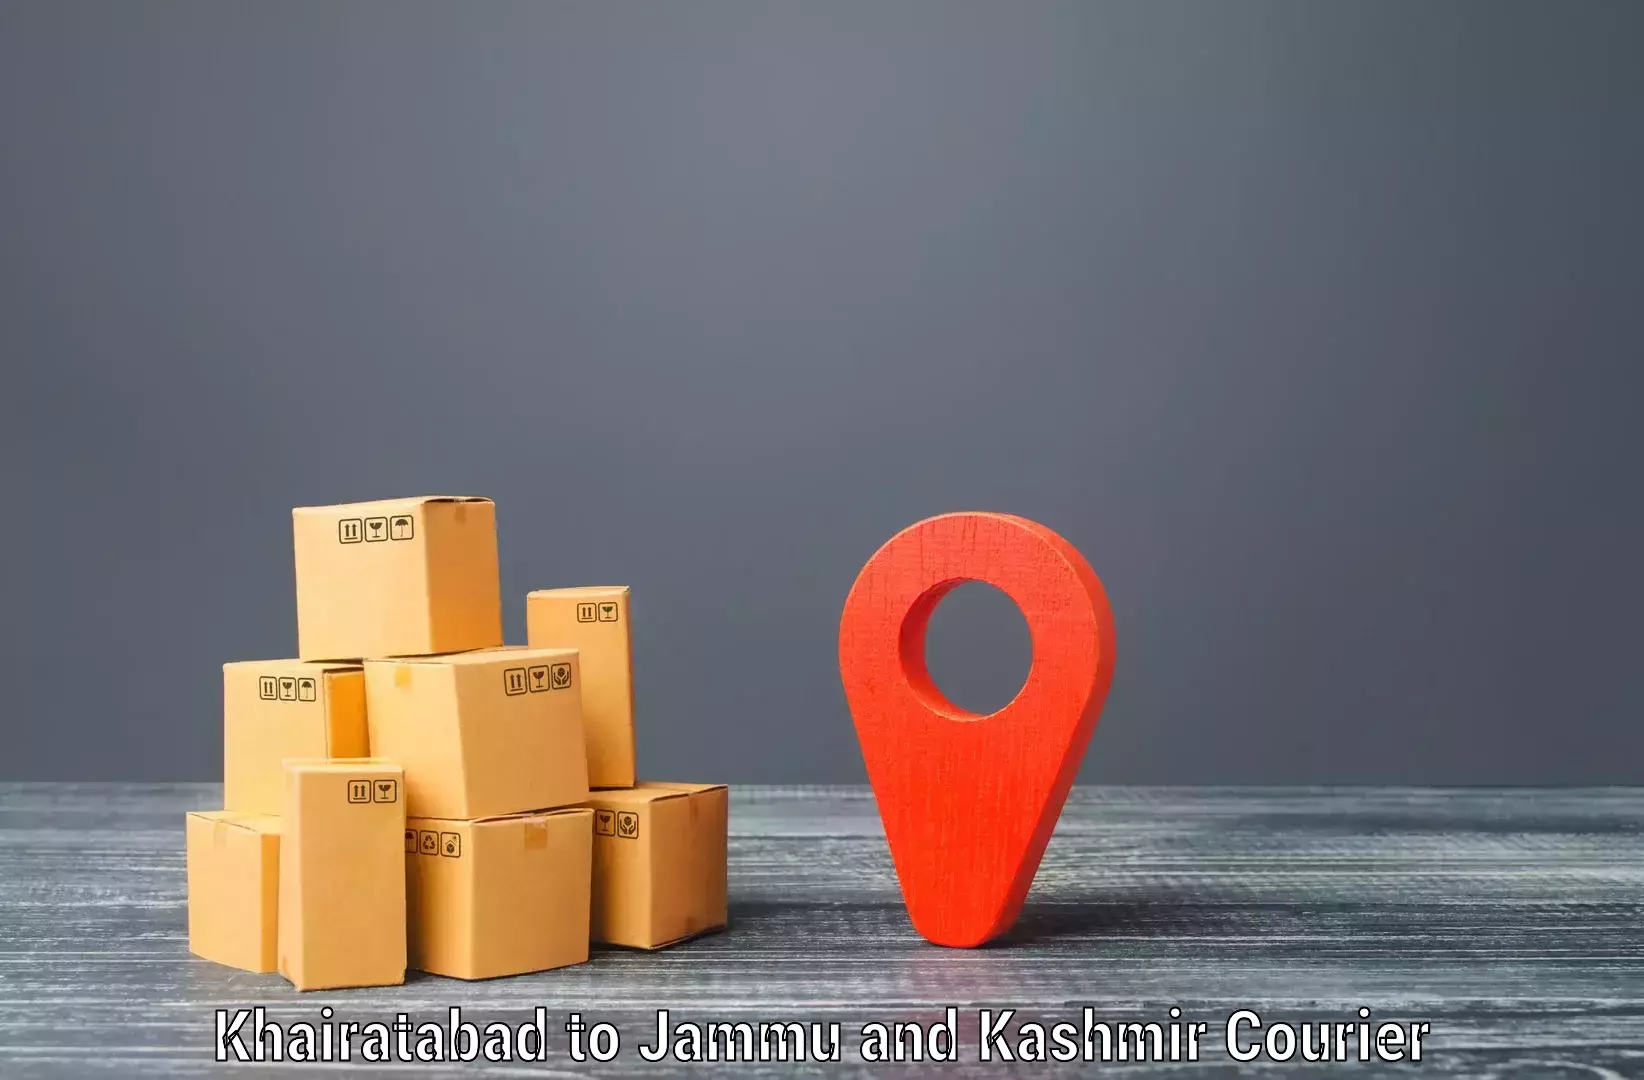 Courier service efficiency in Khairatabad to Baramulla